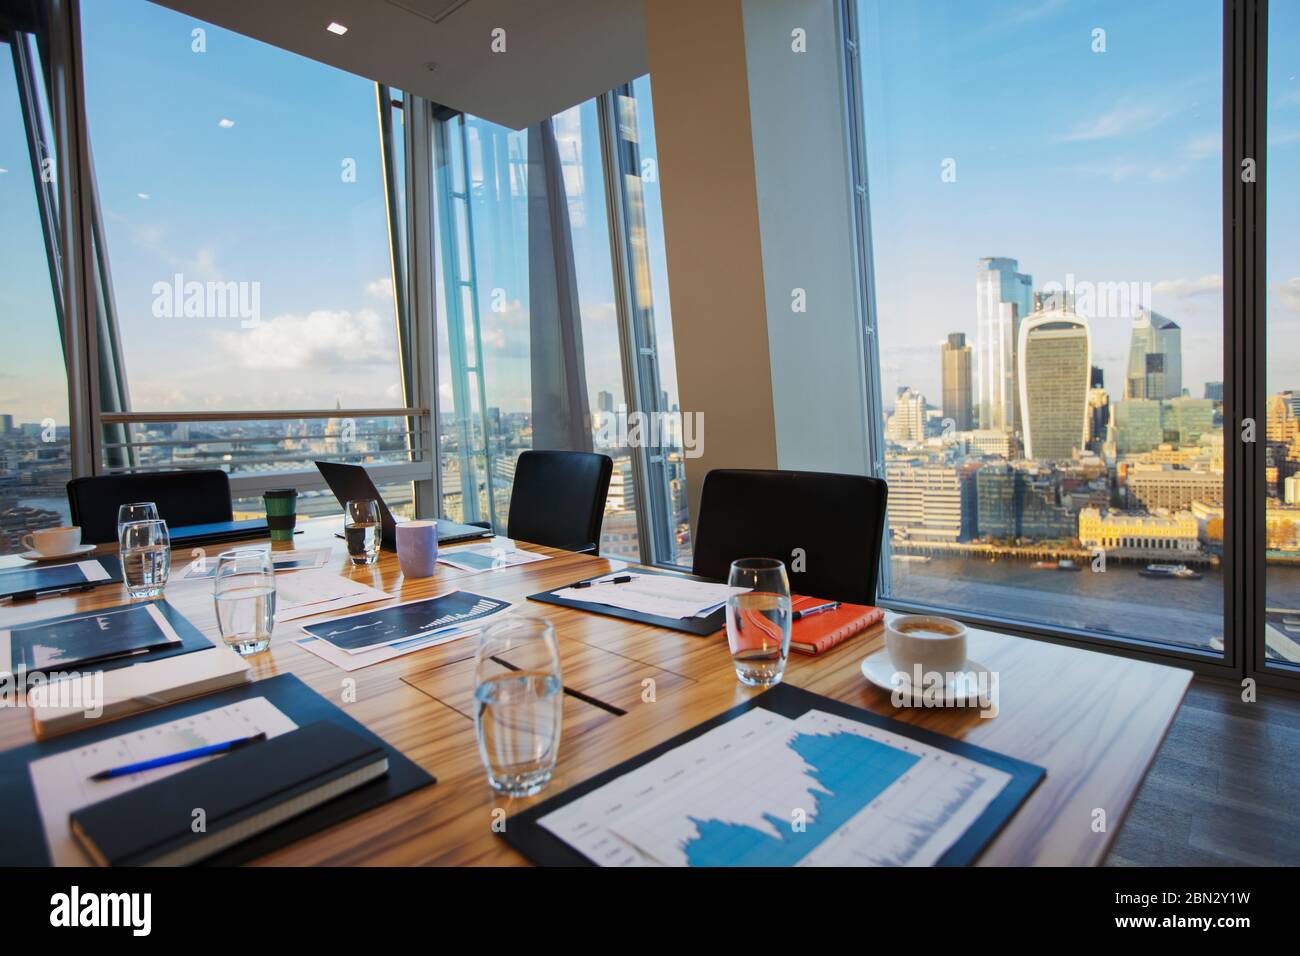 Modern conference room overlooking highrise buildings and city Stock Photo